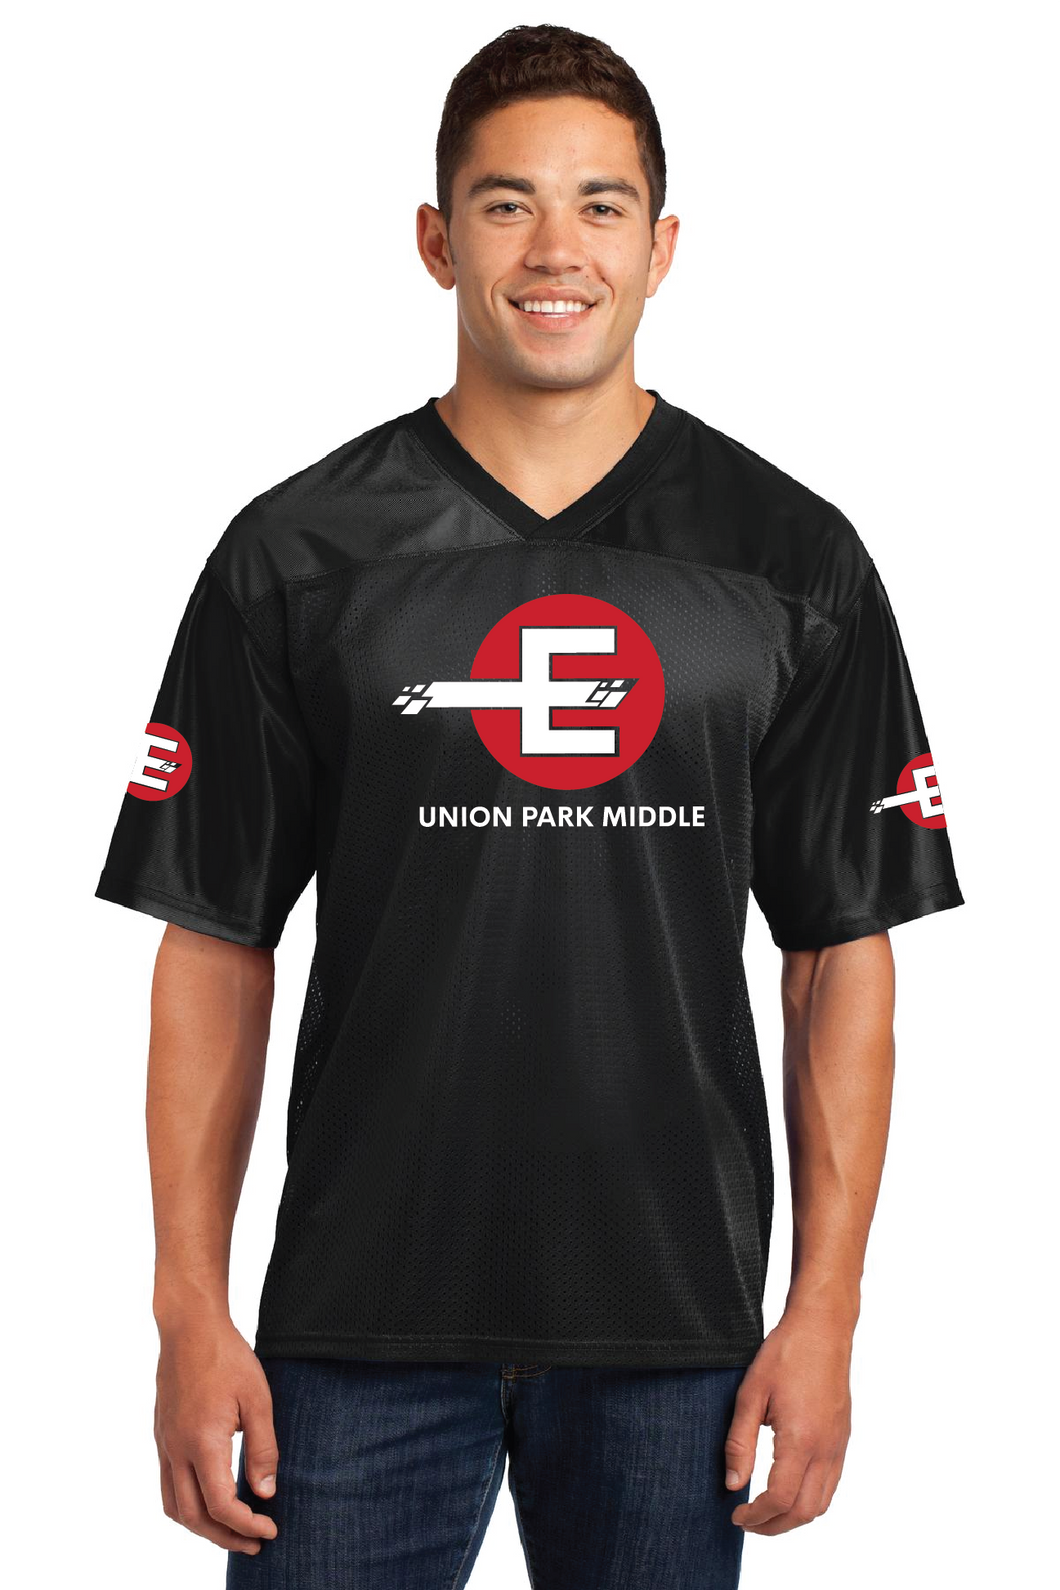 Union Park Middle Football Jersey